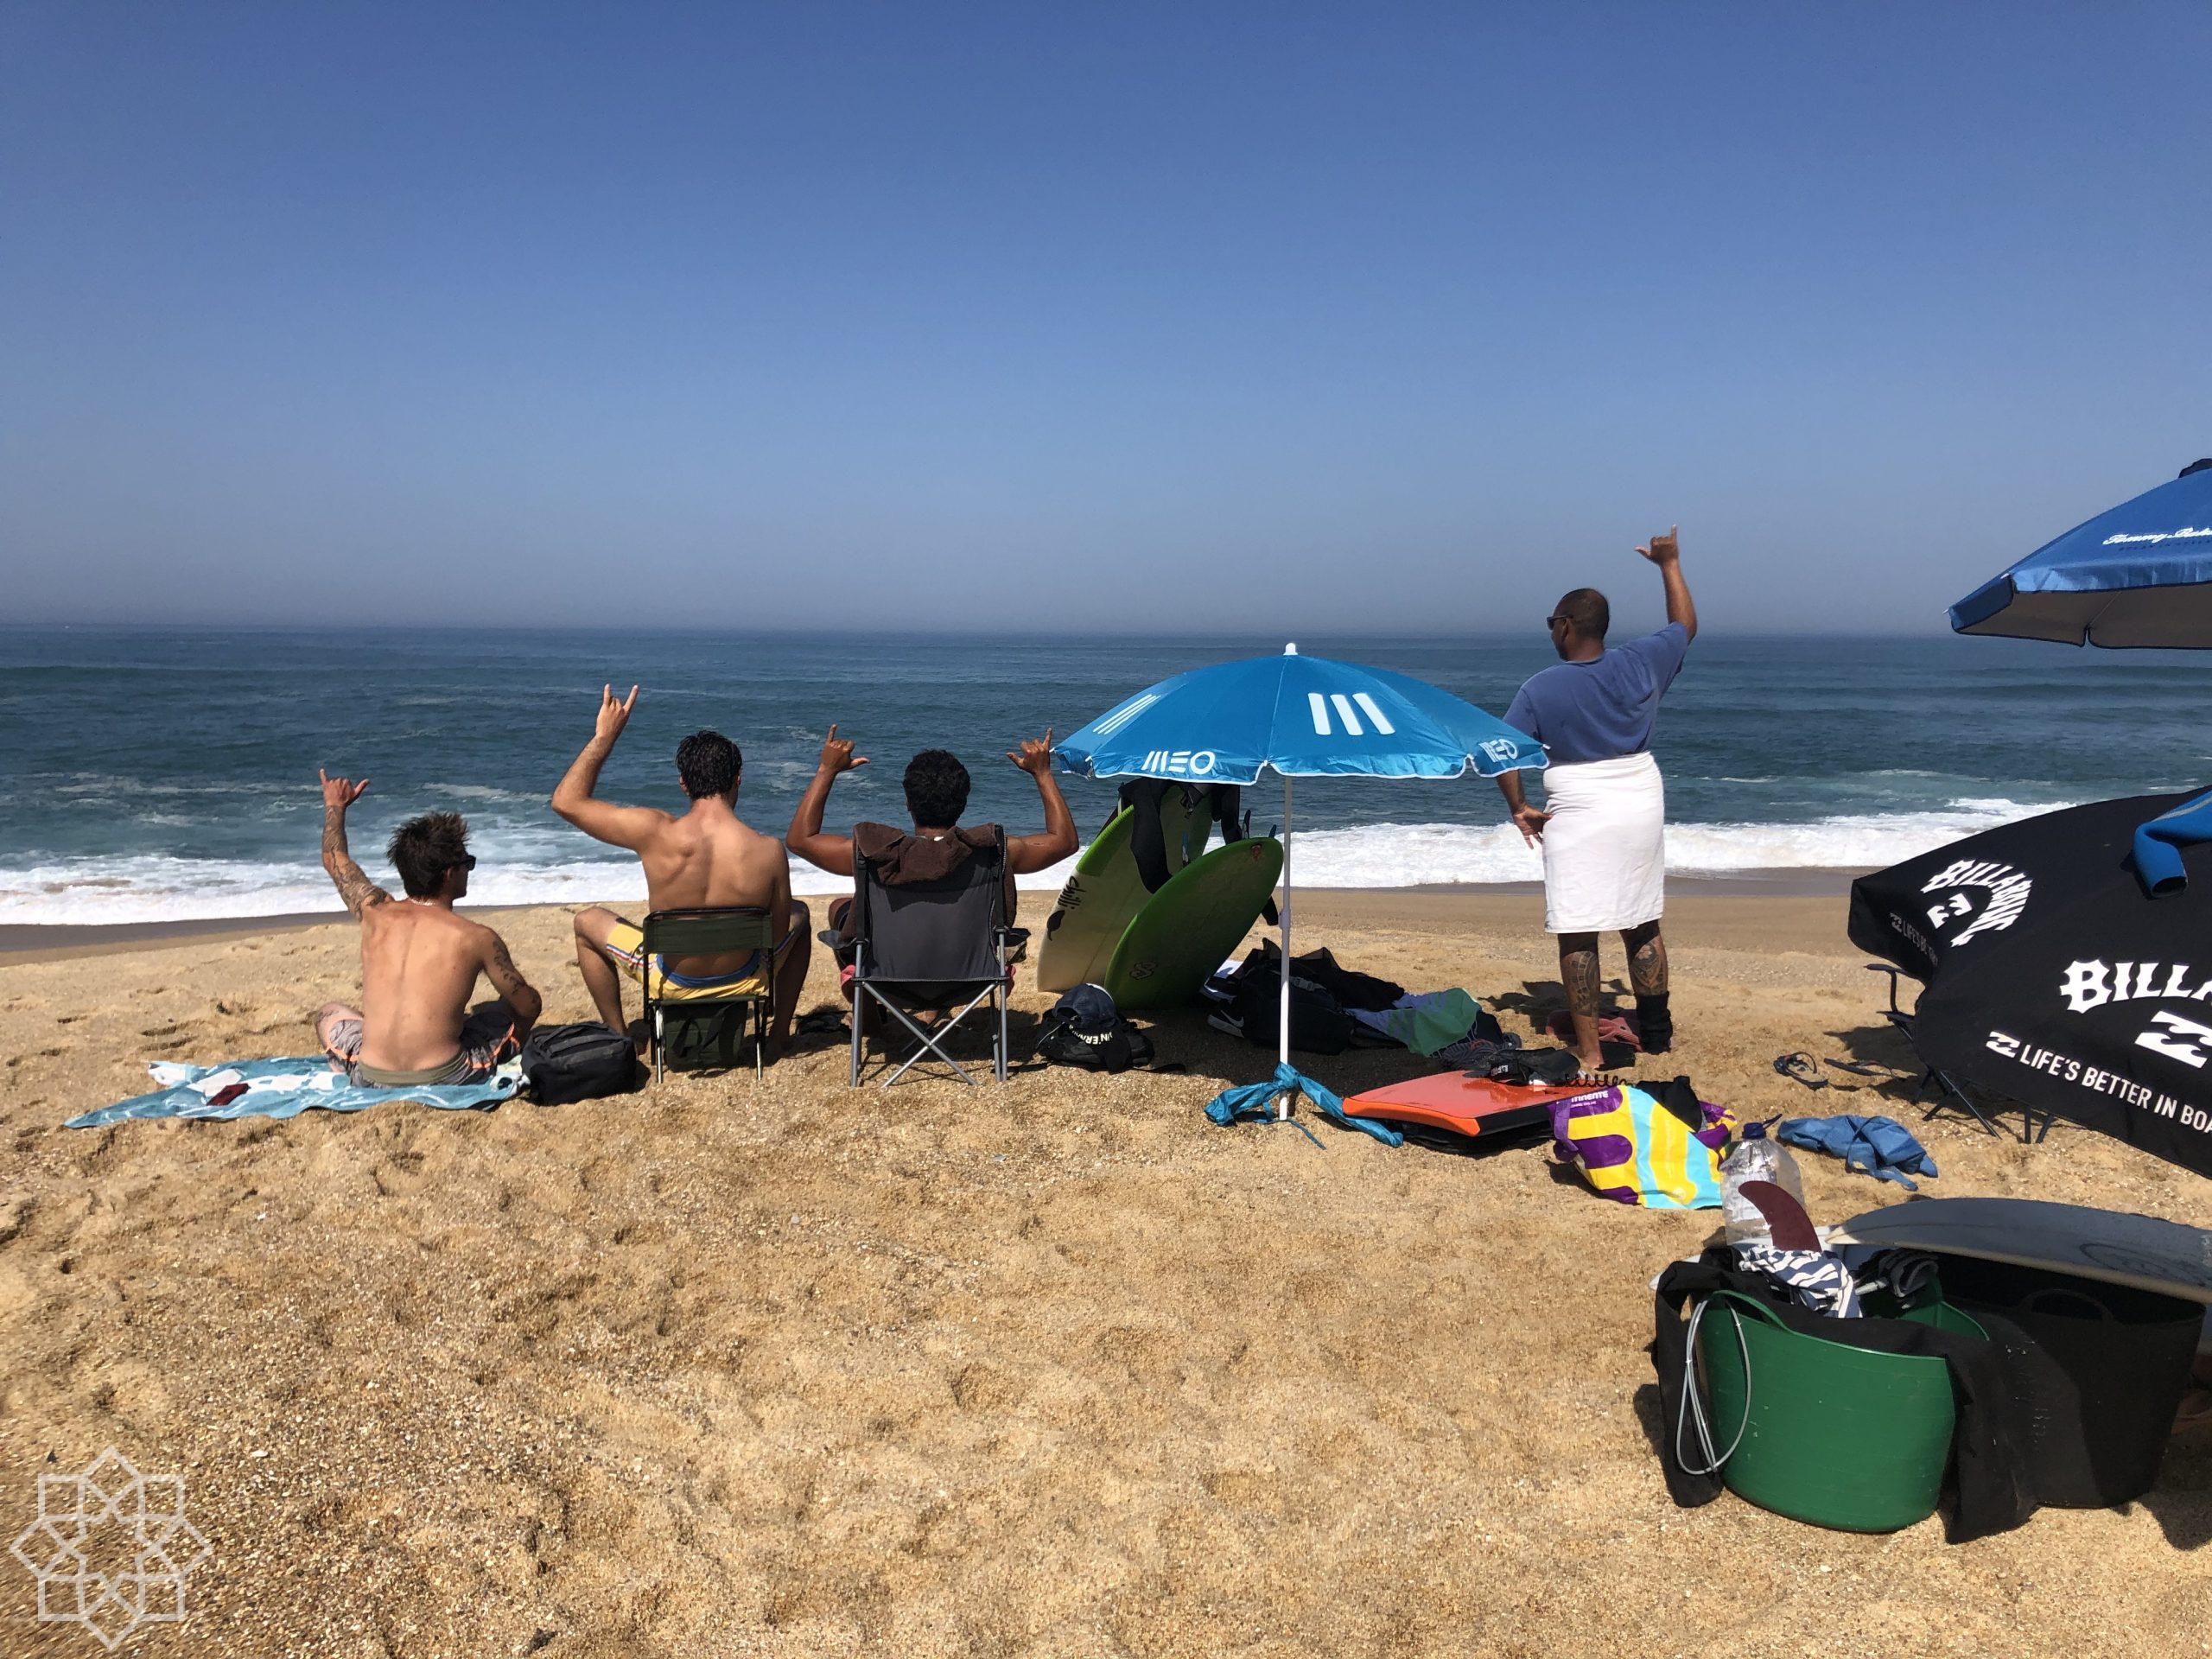 Welcome back to Nazaré! Surfers on Praia do Norte May 28 2020